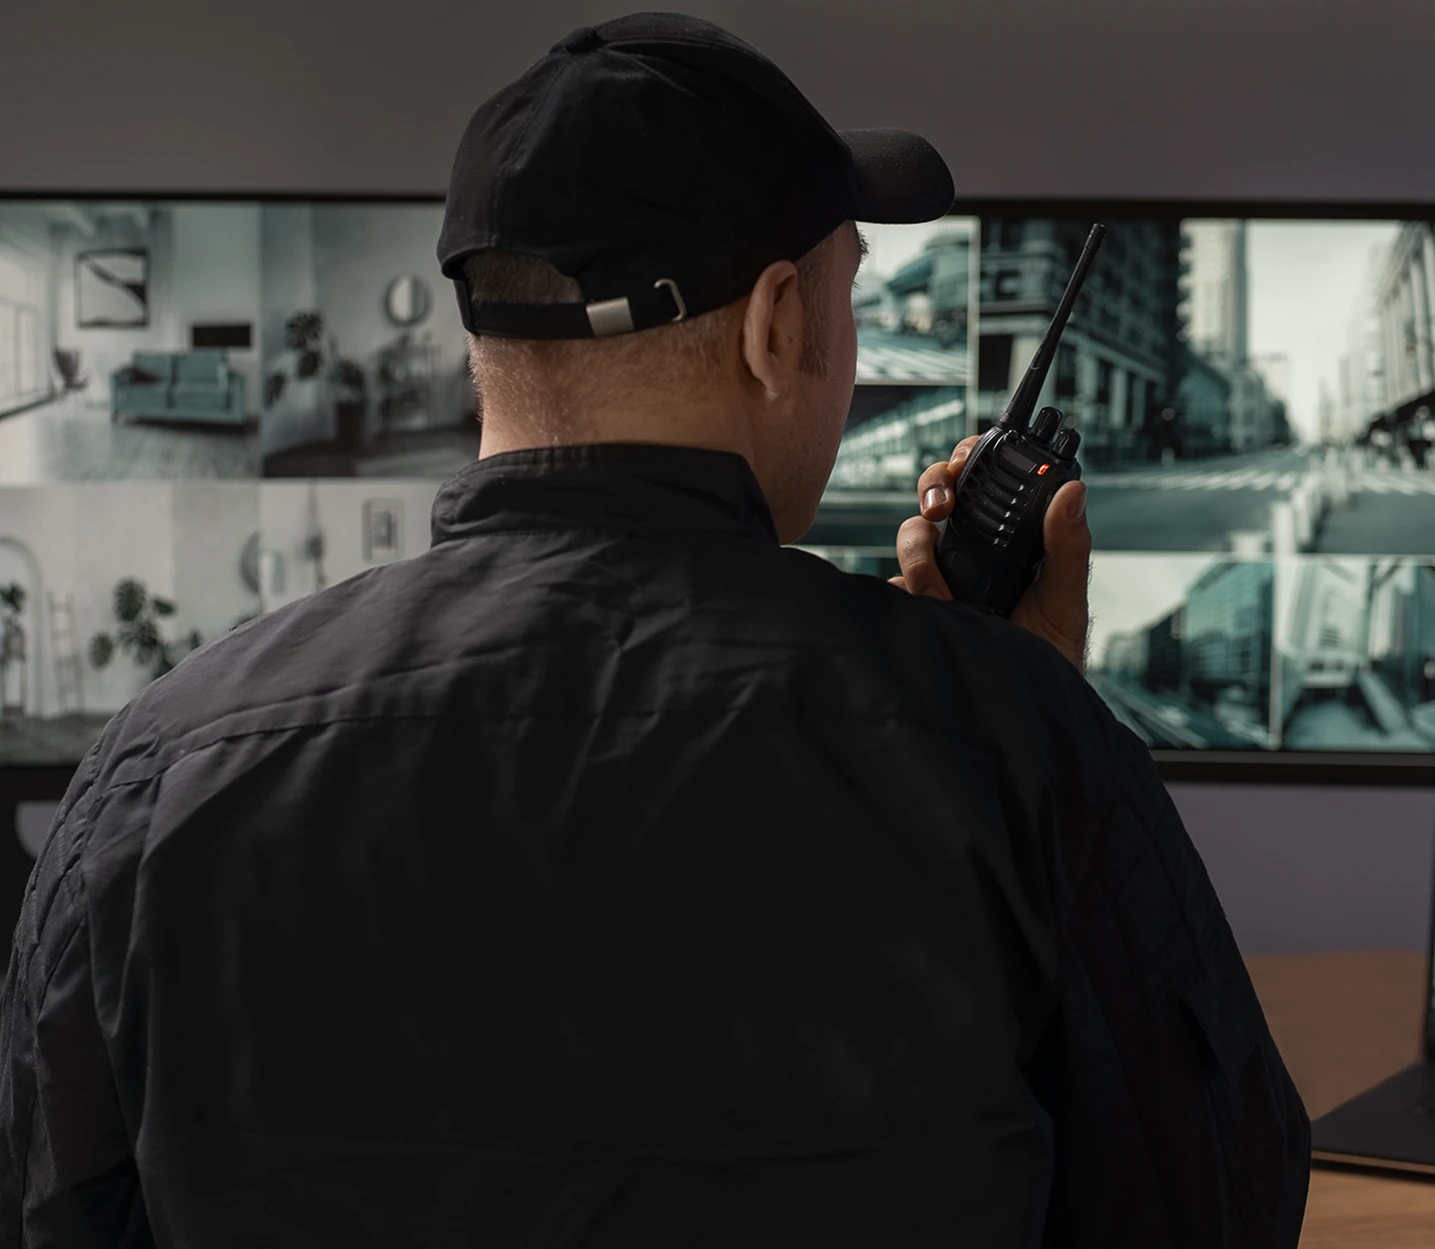 Guard Mark CCTV operator monitors footage, adeptly handling diverse situations to ensure security and safety effectively.